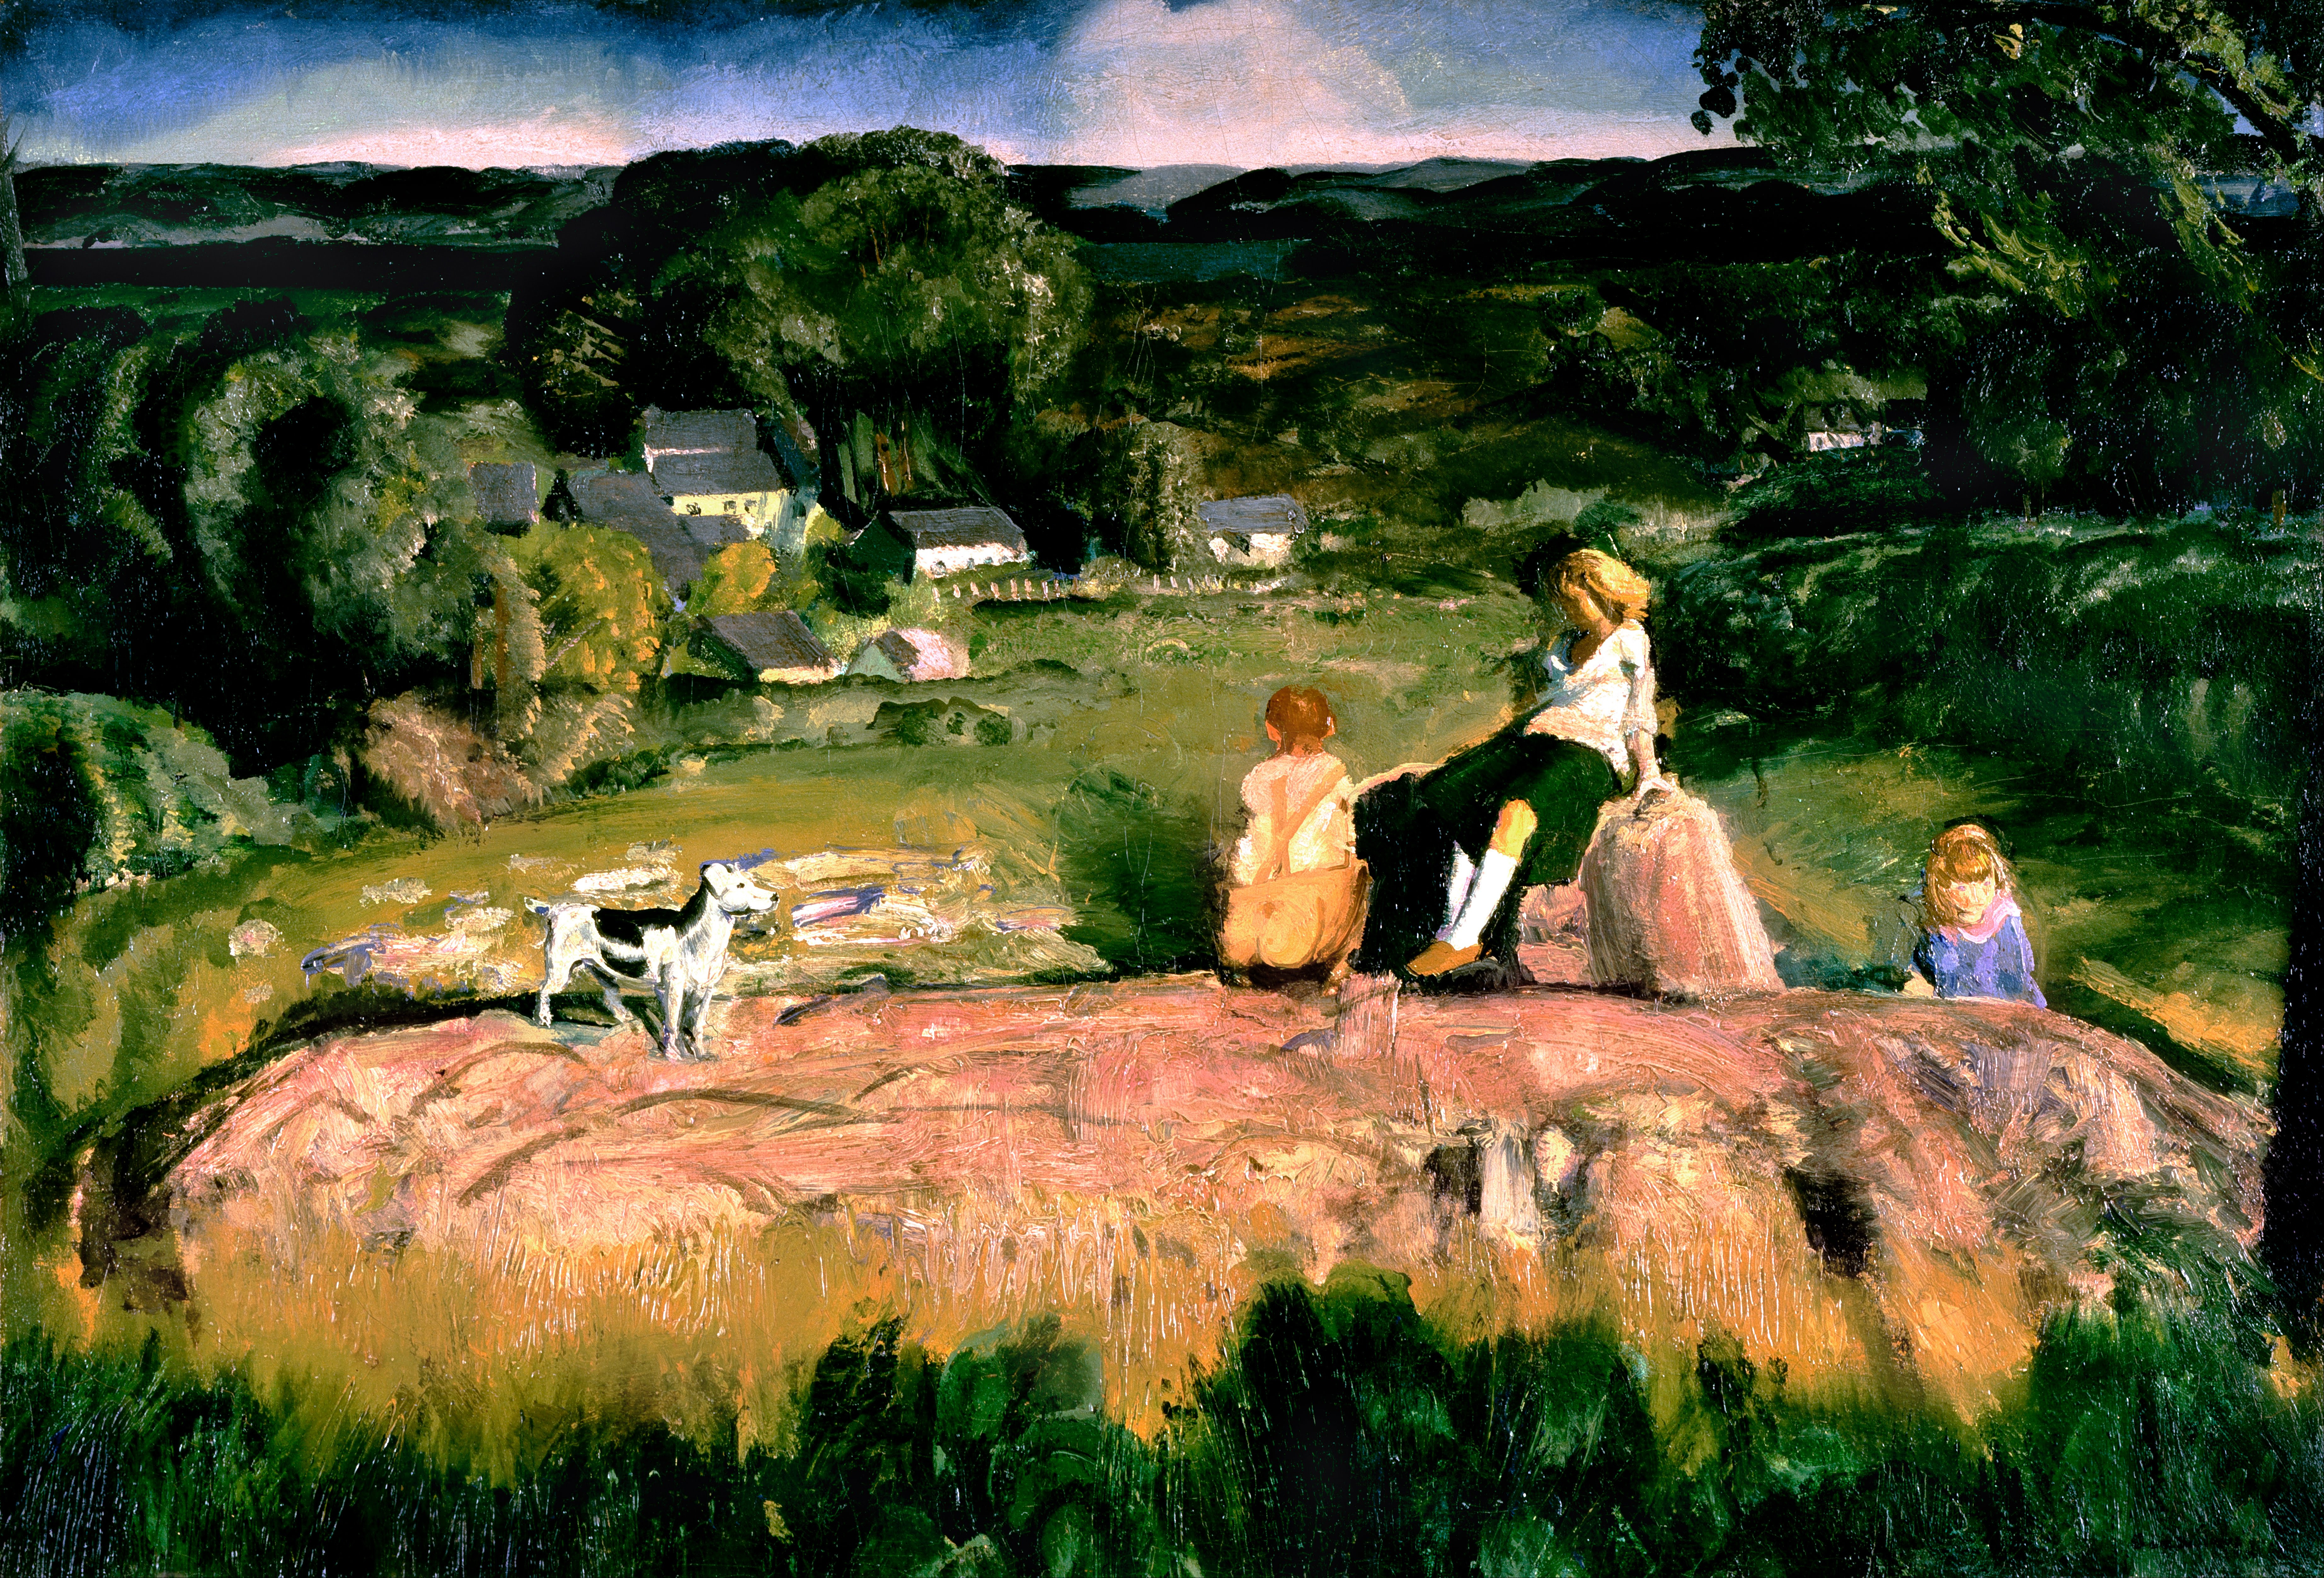 Three Children by George Bellows - 1919 - 112 x 77.1 cm The White House